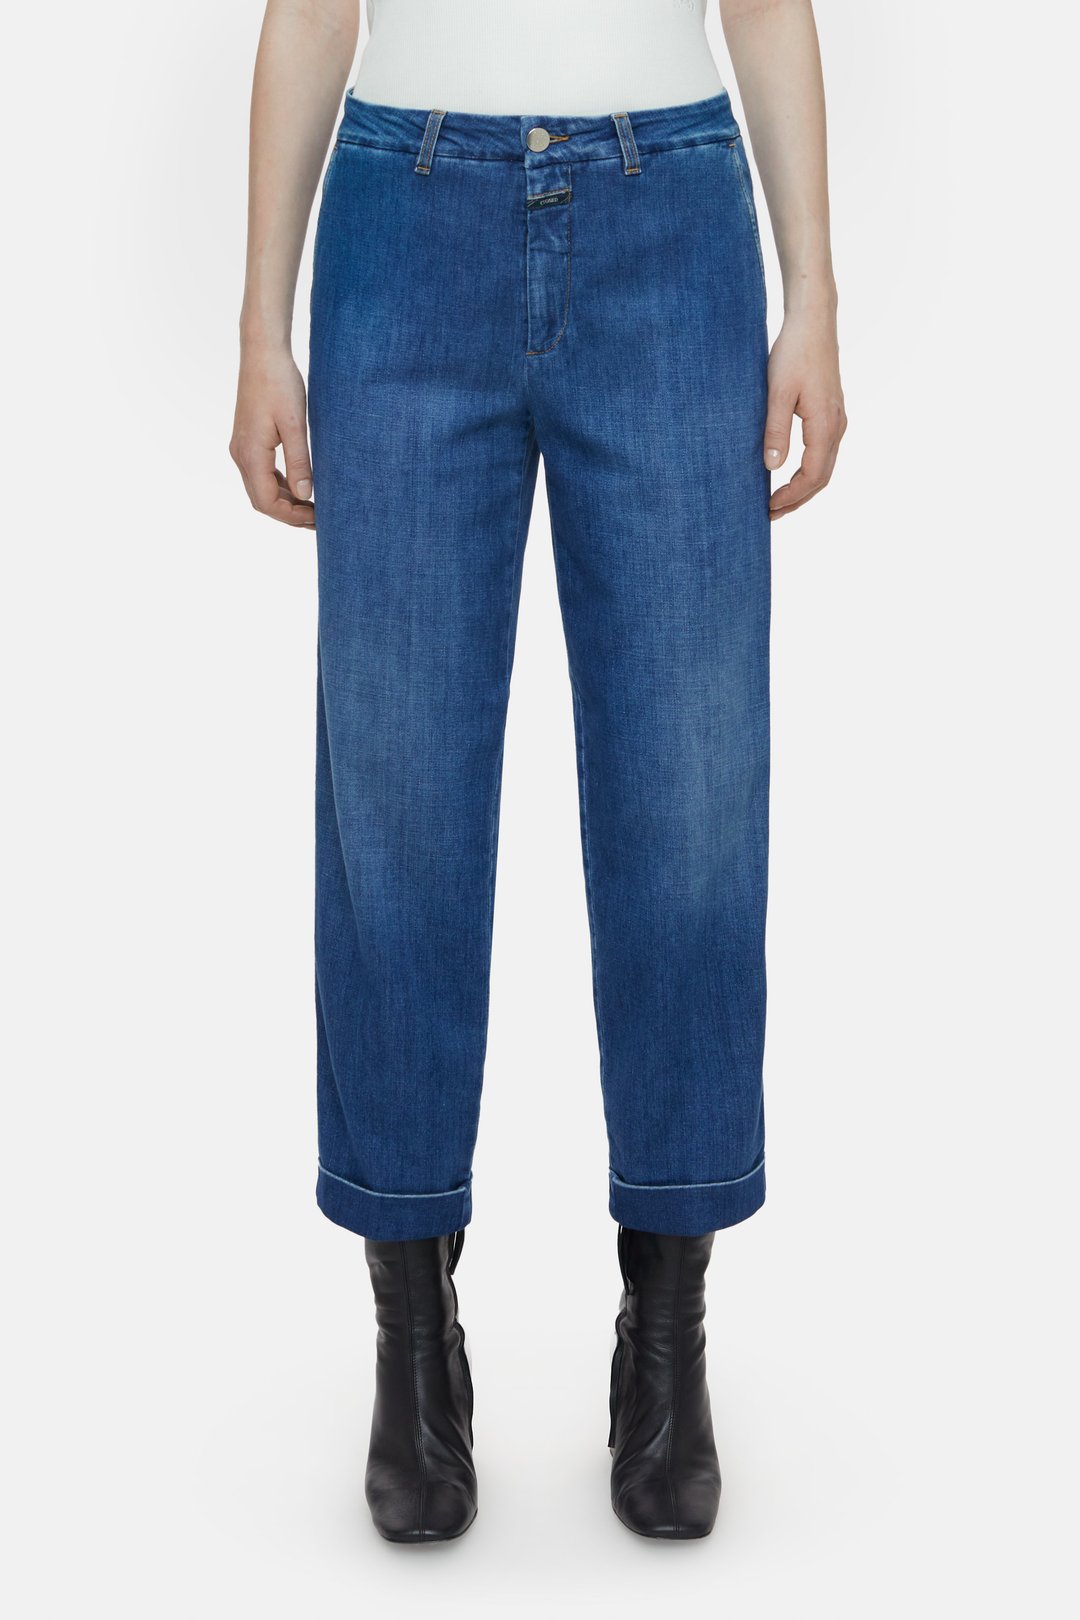 JEANS AUCKLEY